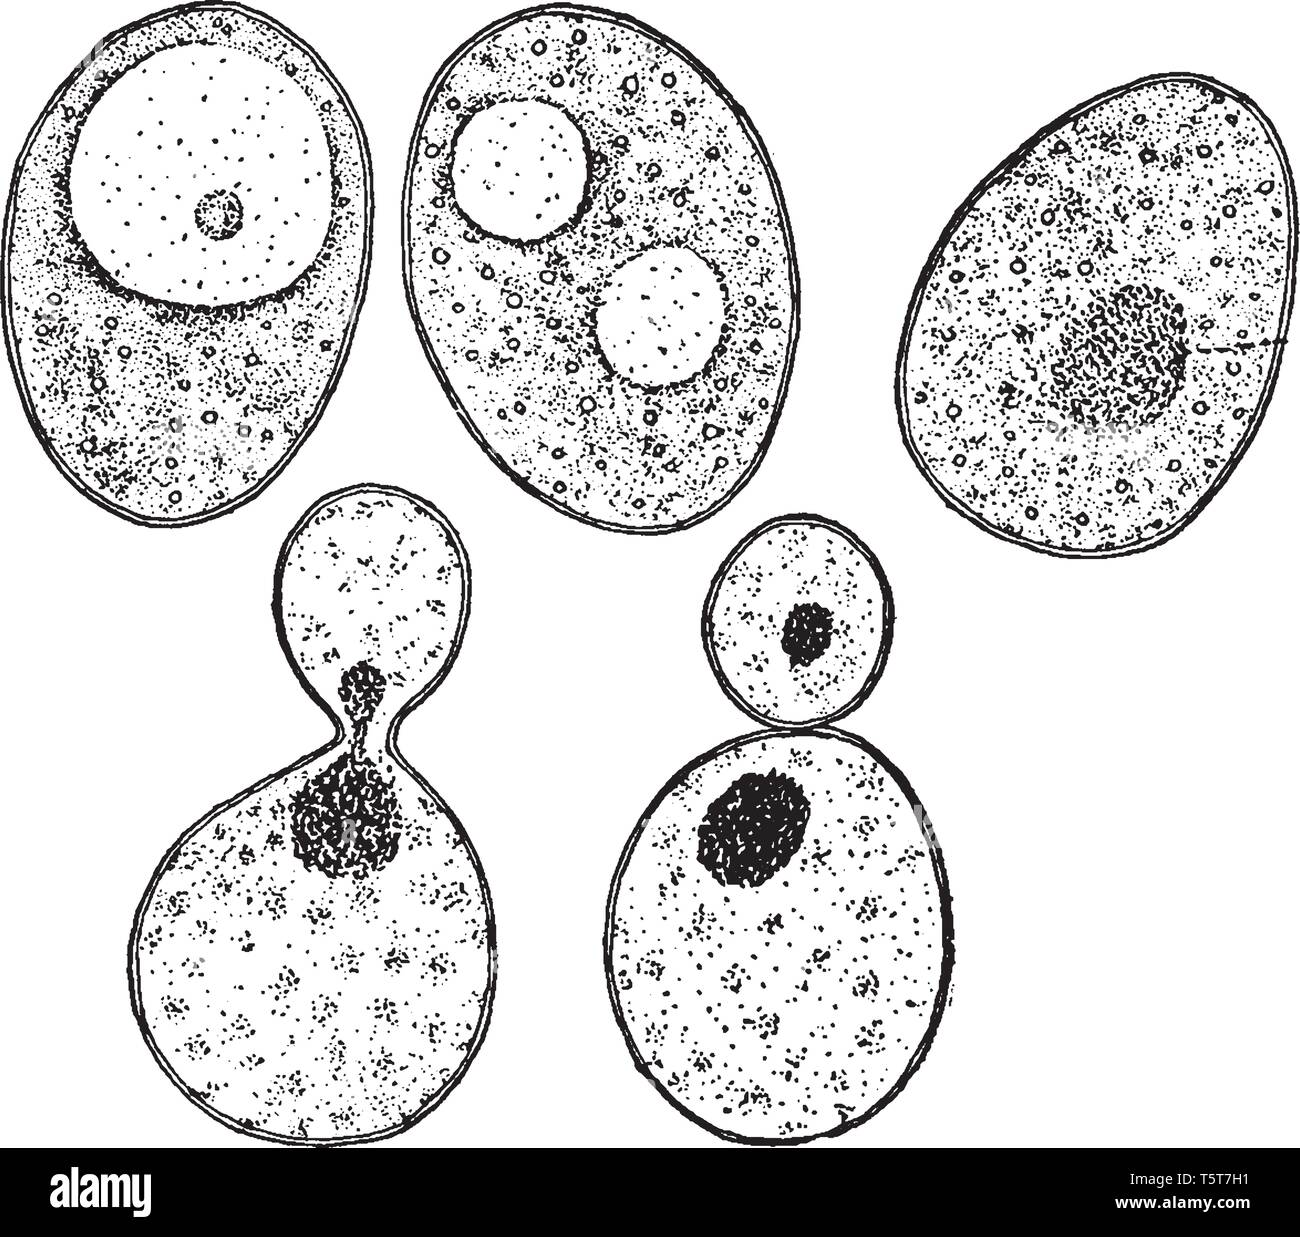 A picture showing a bit of Common Yeast Cake when mixed with Water and examined under the Microscope, vintage line drawing or engraving illustration. Stock Vector